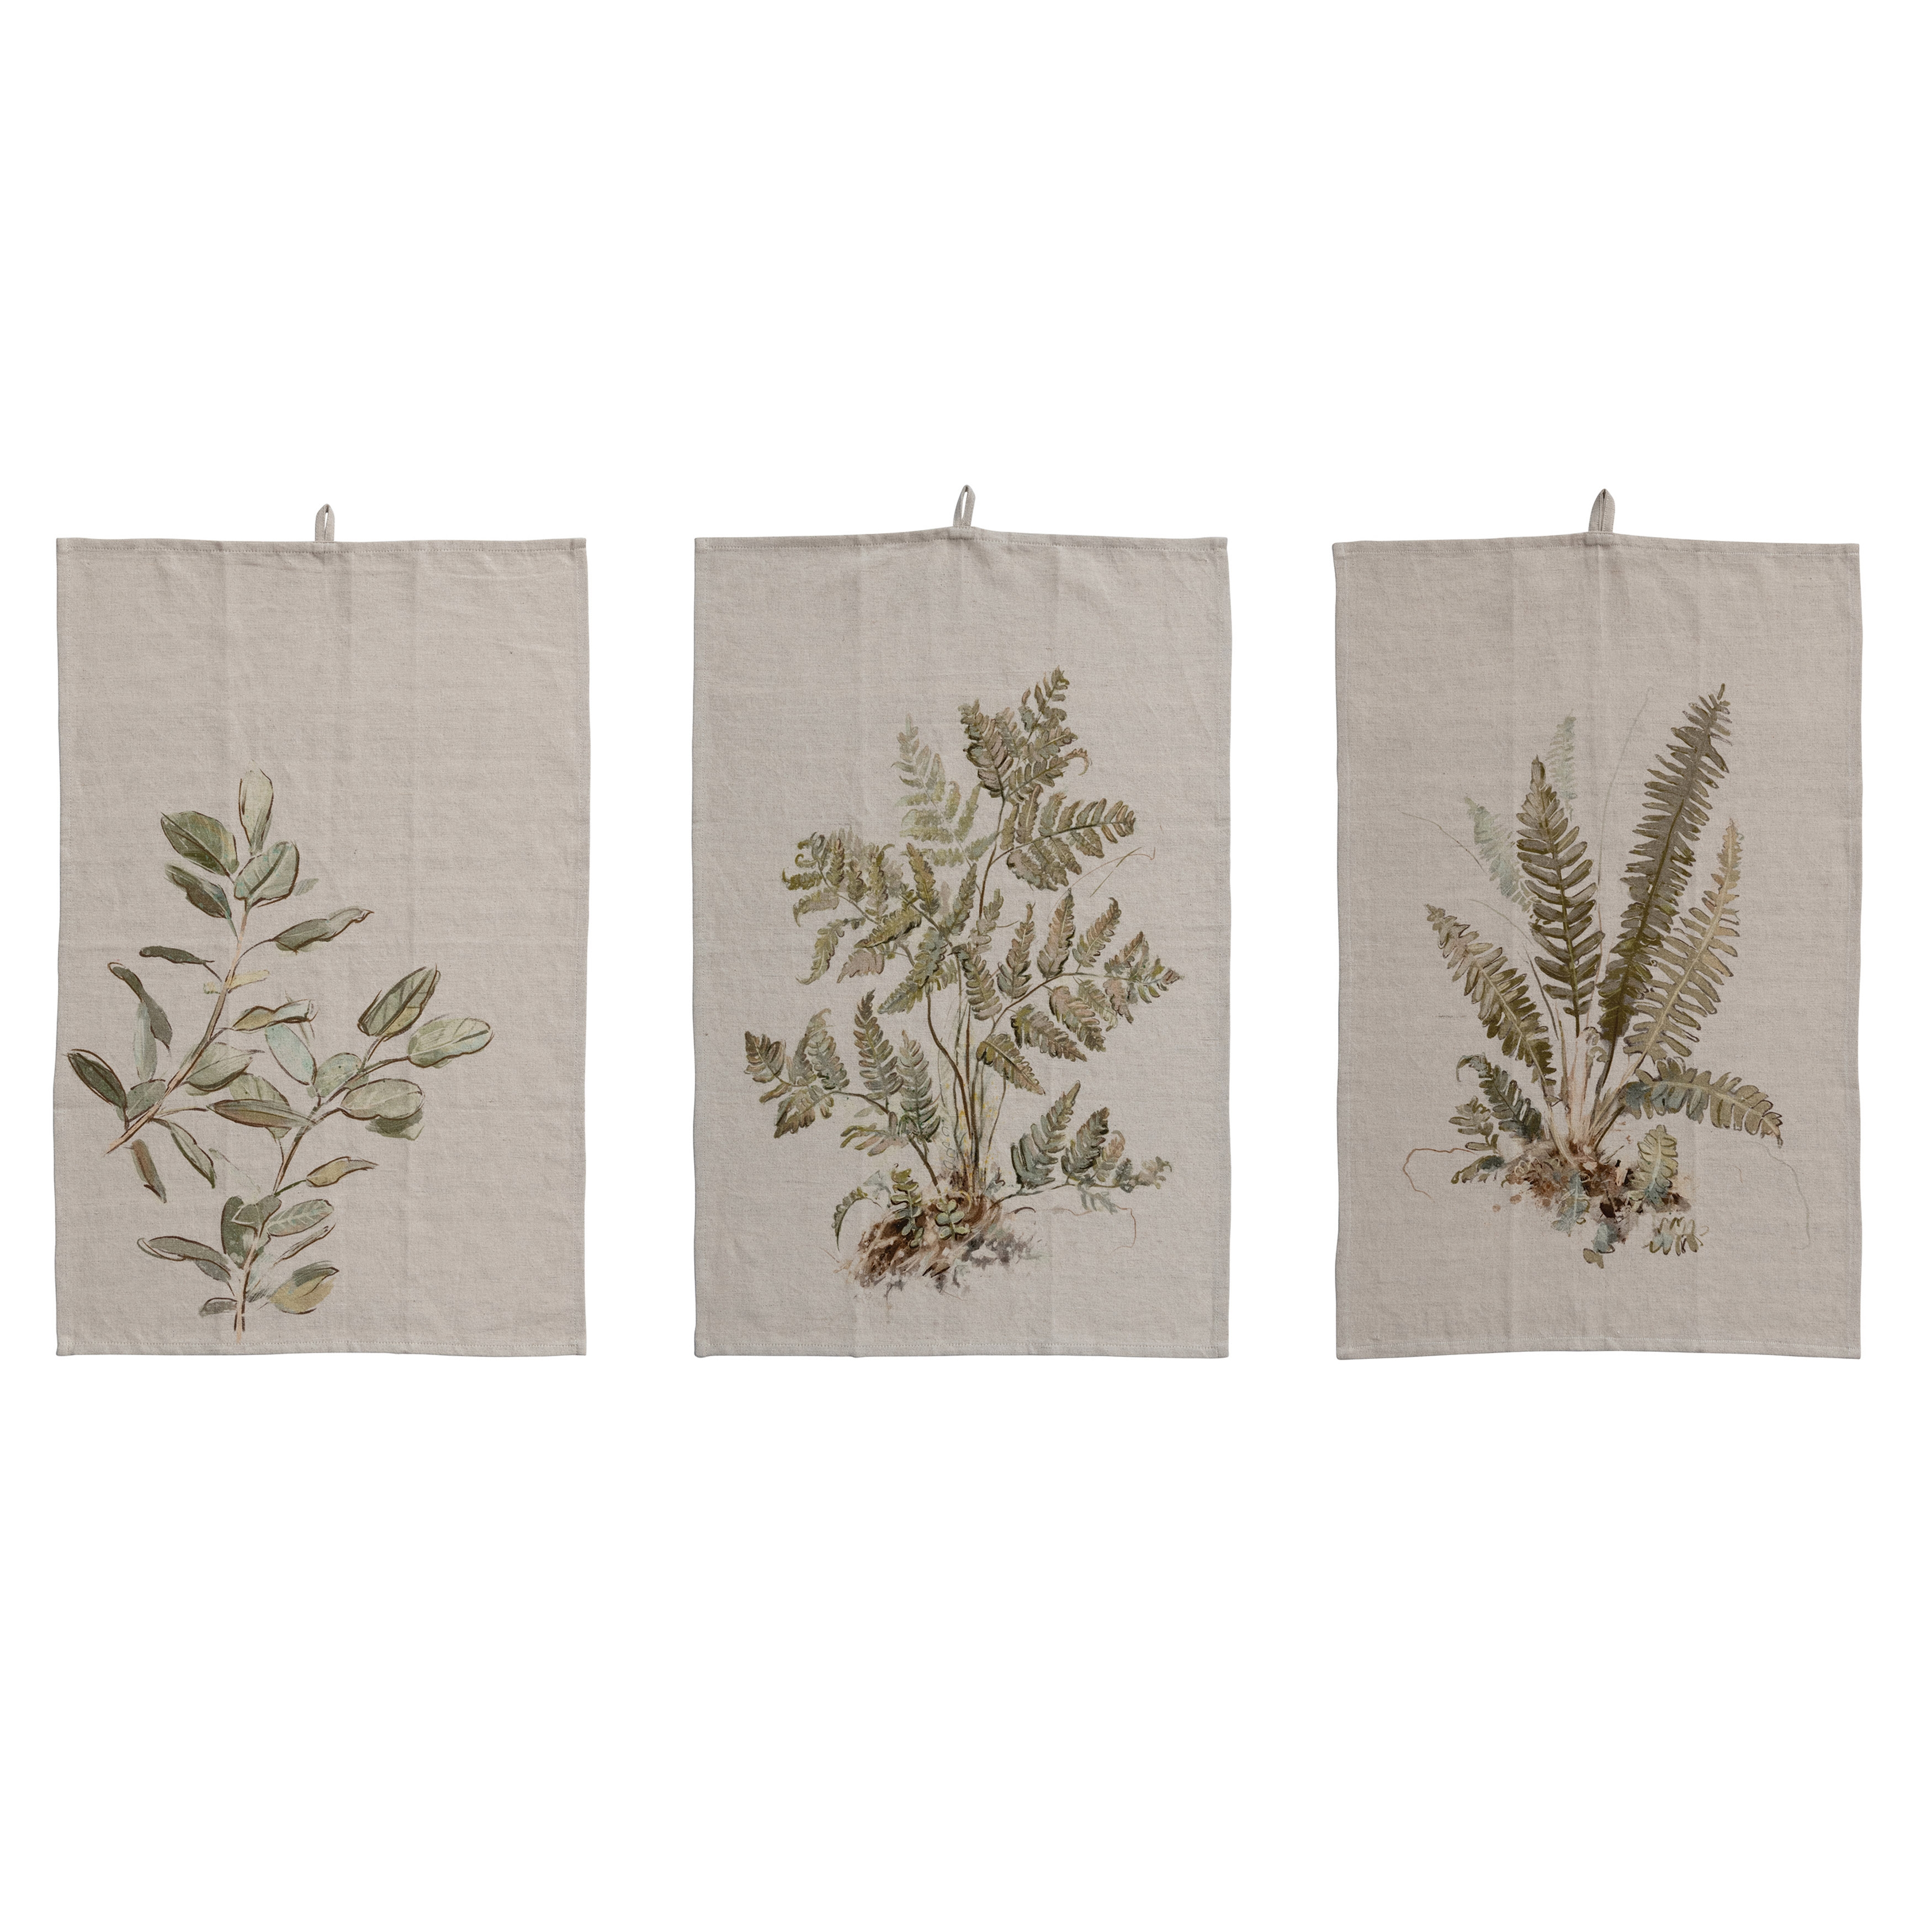  Cotton and Linen Printed Tea Towel with Botanical Image, and Loop, Set of 3 Styles - Image 0